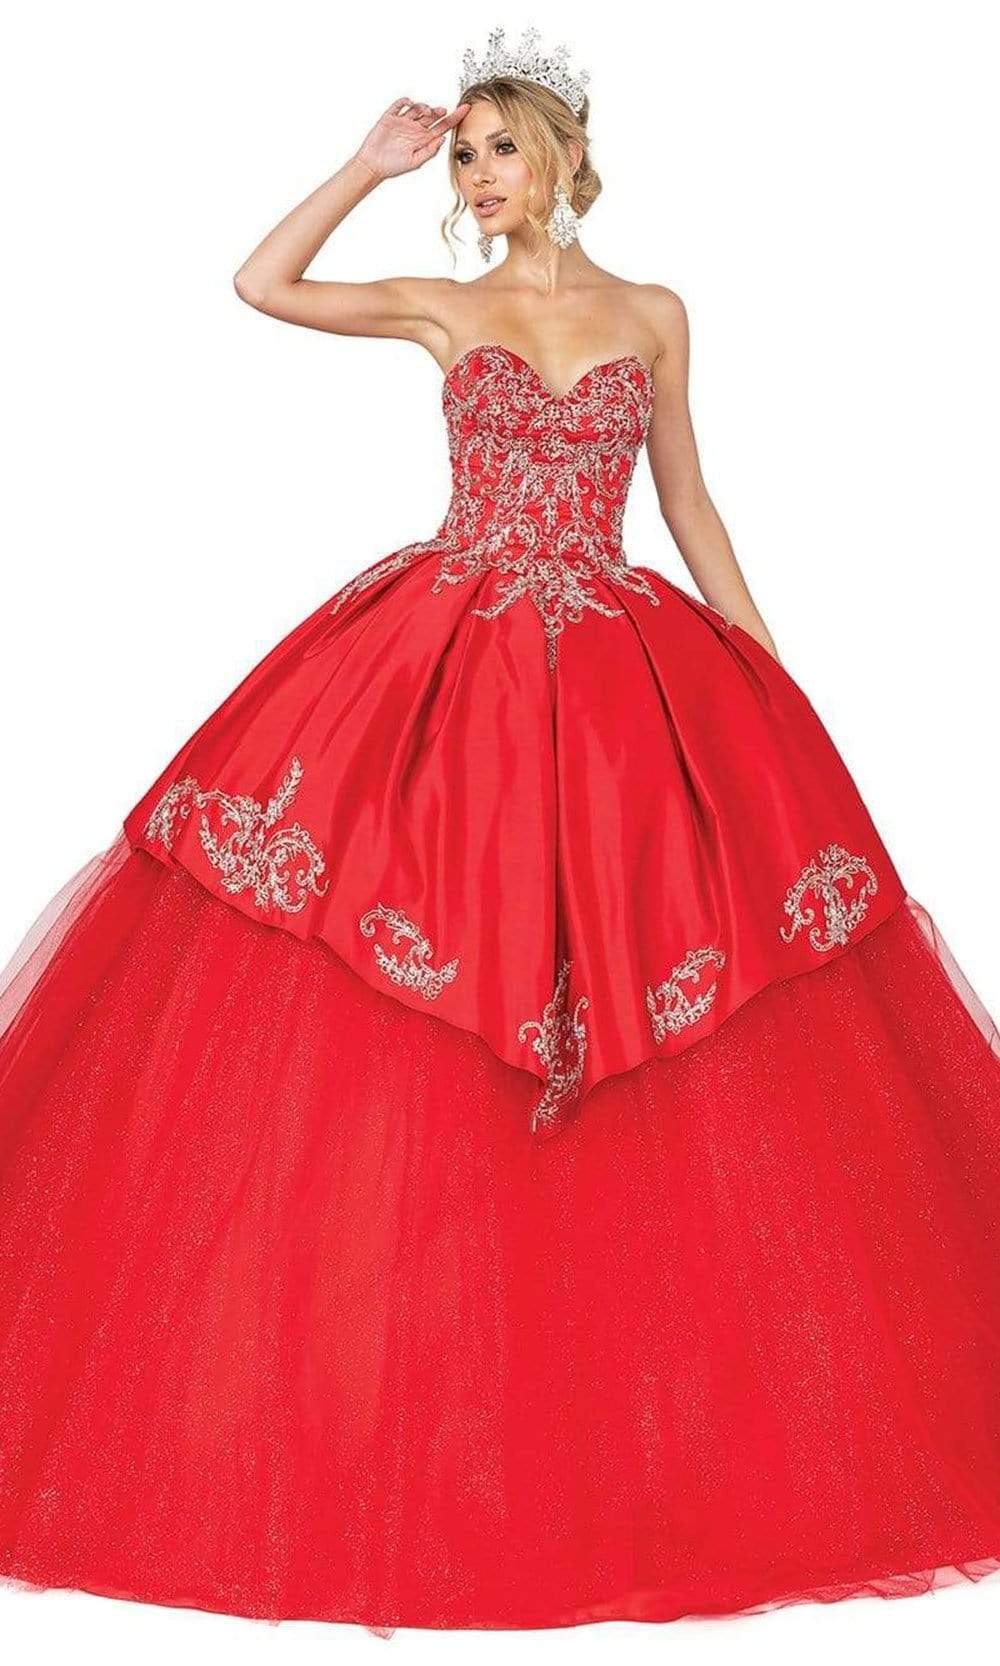 Dancing Queen - 1557 Strapless Sweetheart Lace Applique Ballgown Quinceanera Dresses XS / Red